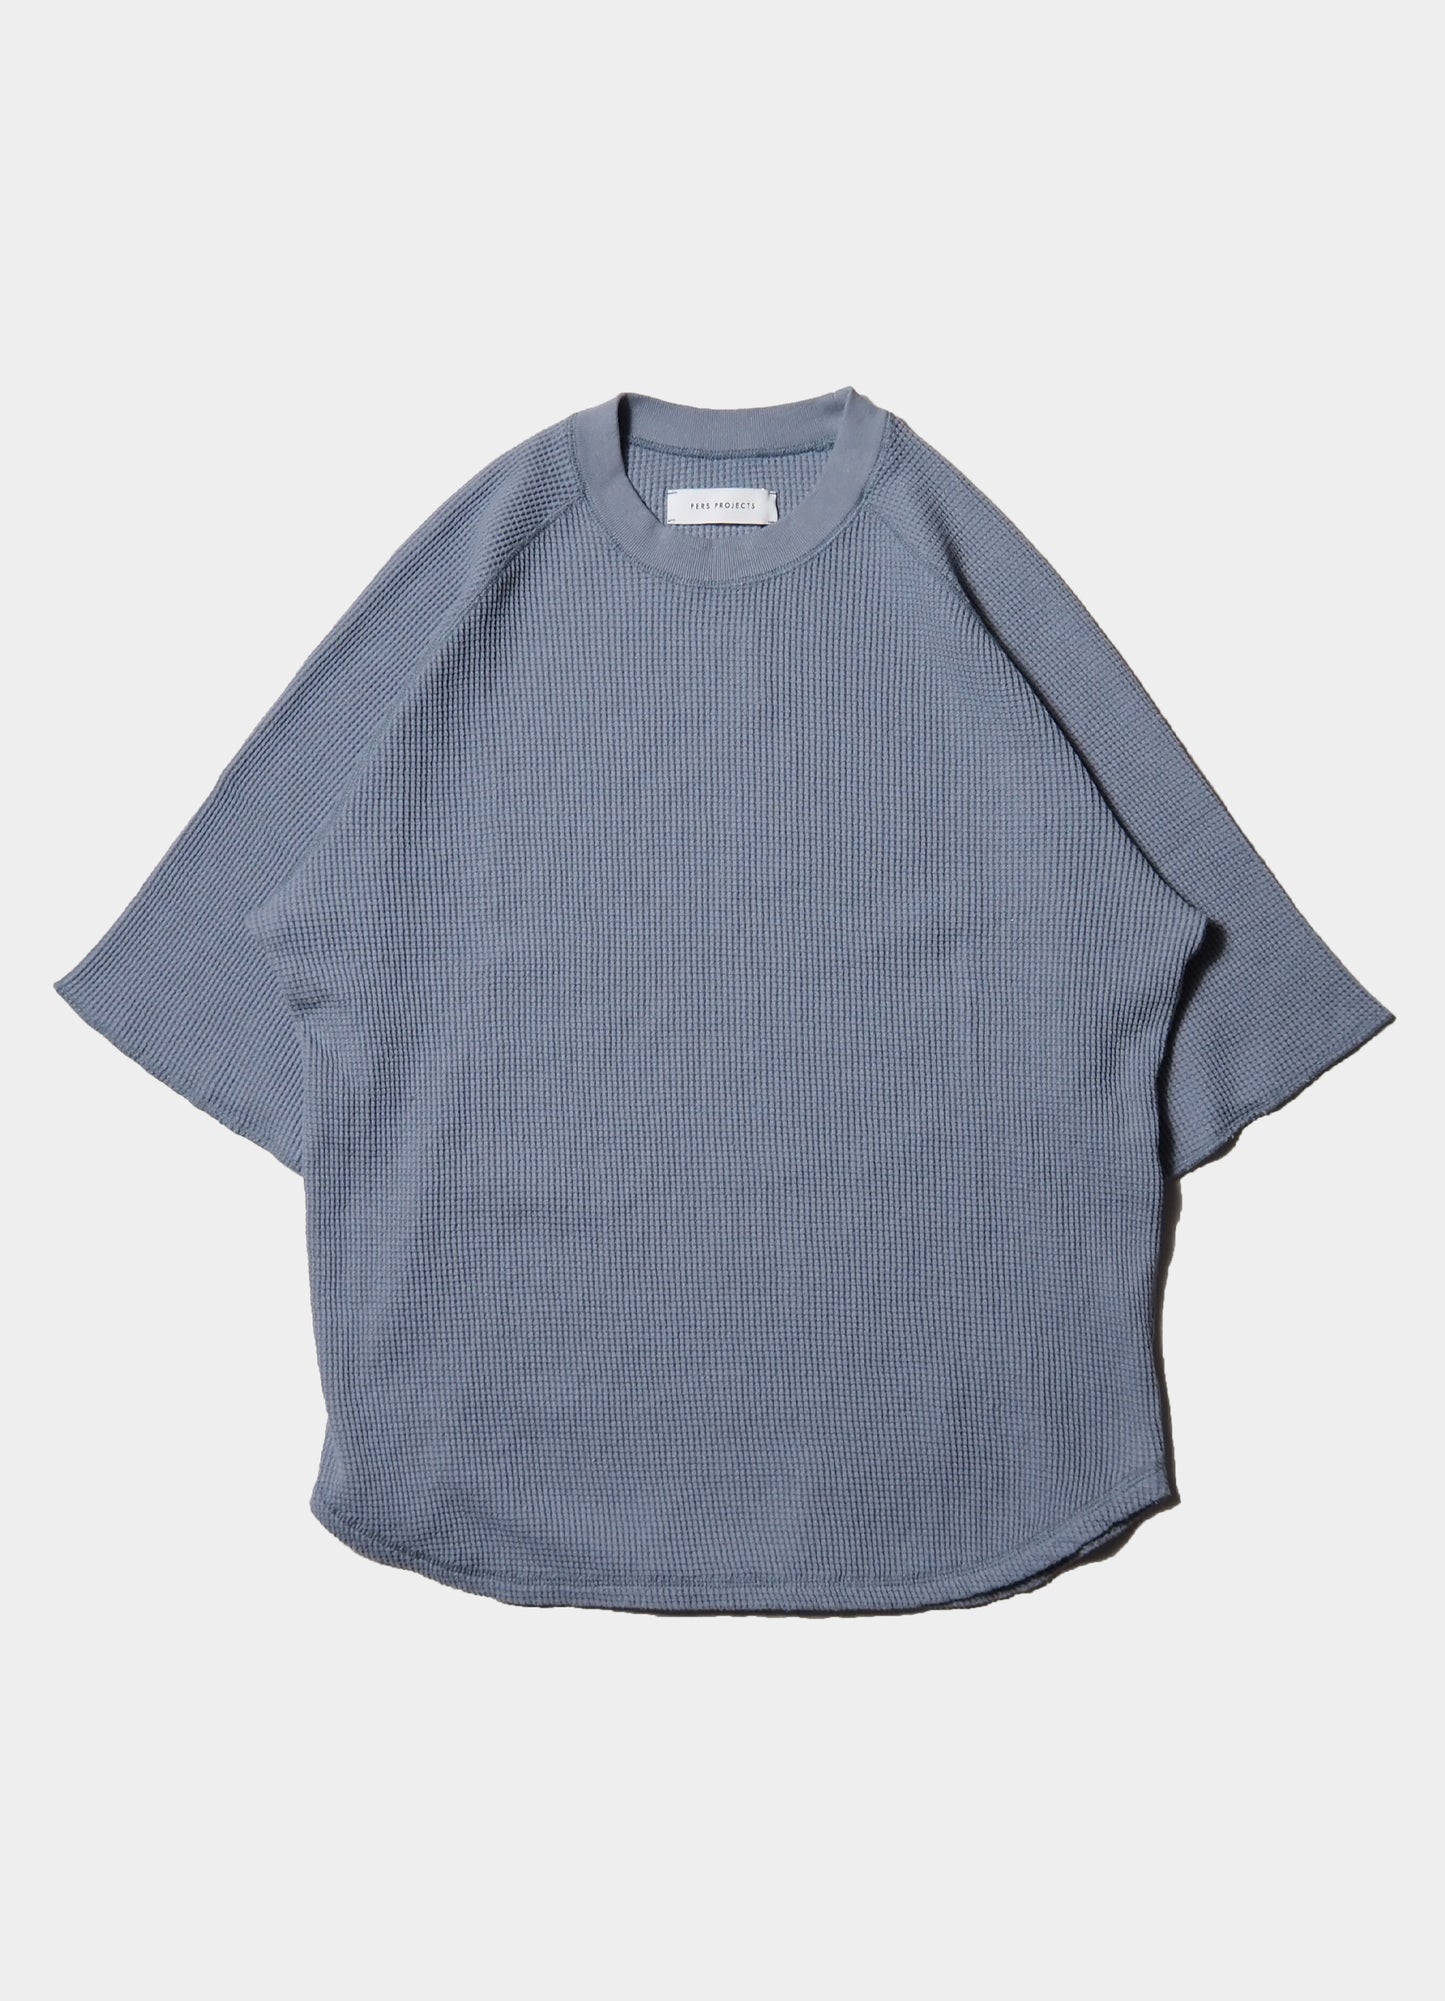 HANSSON H/S TEE "SOLID" [24SP-04031SD]